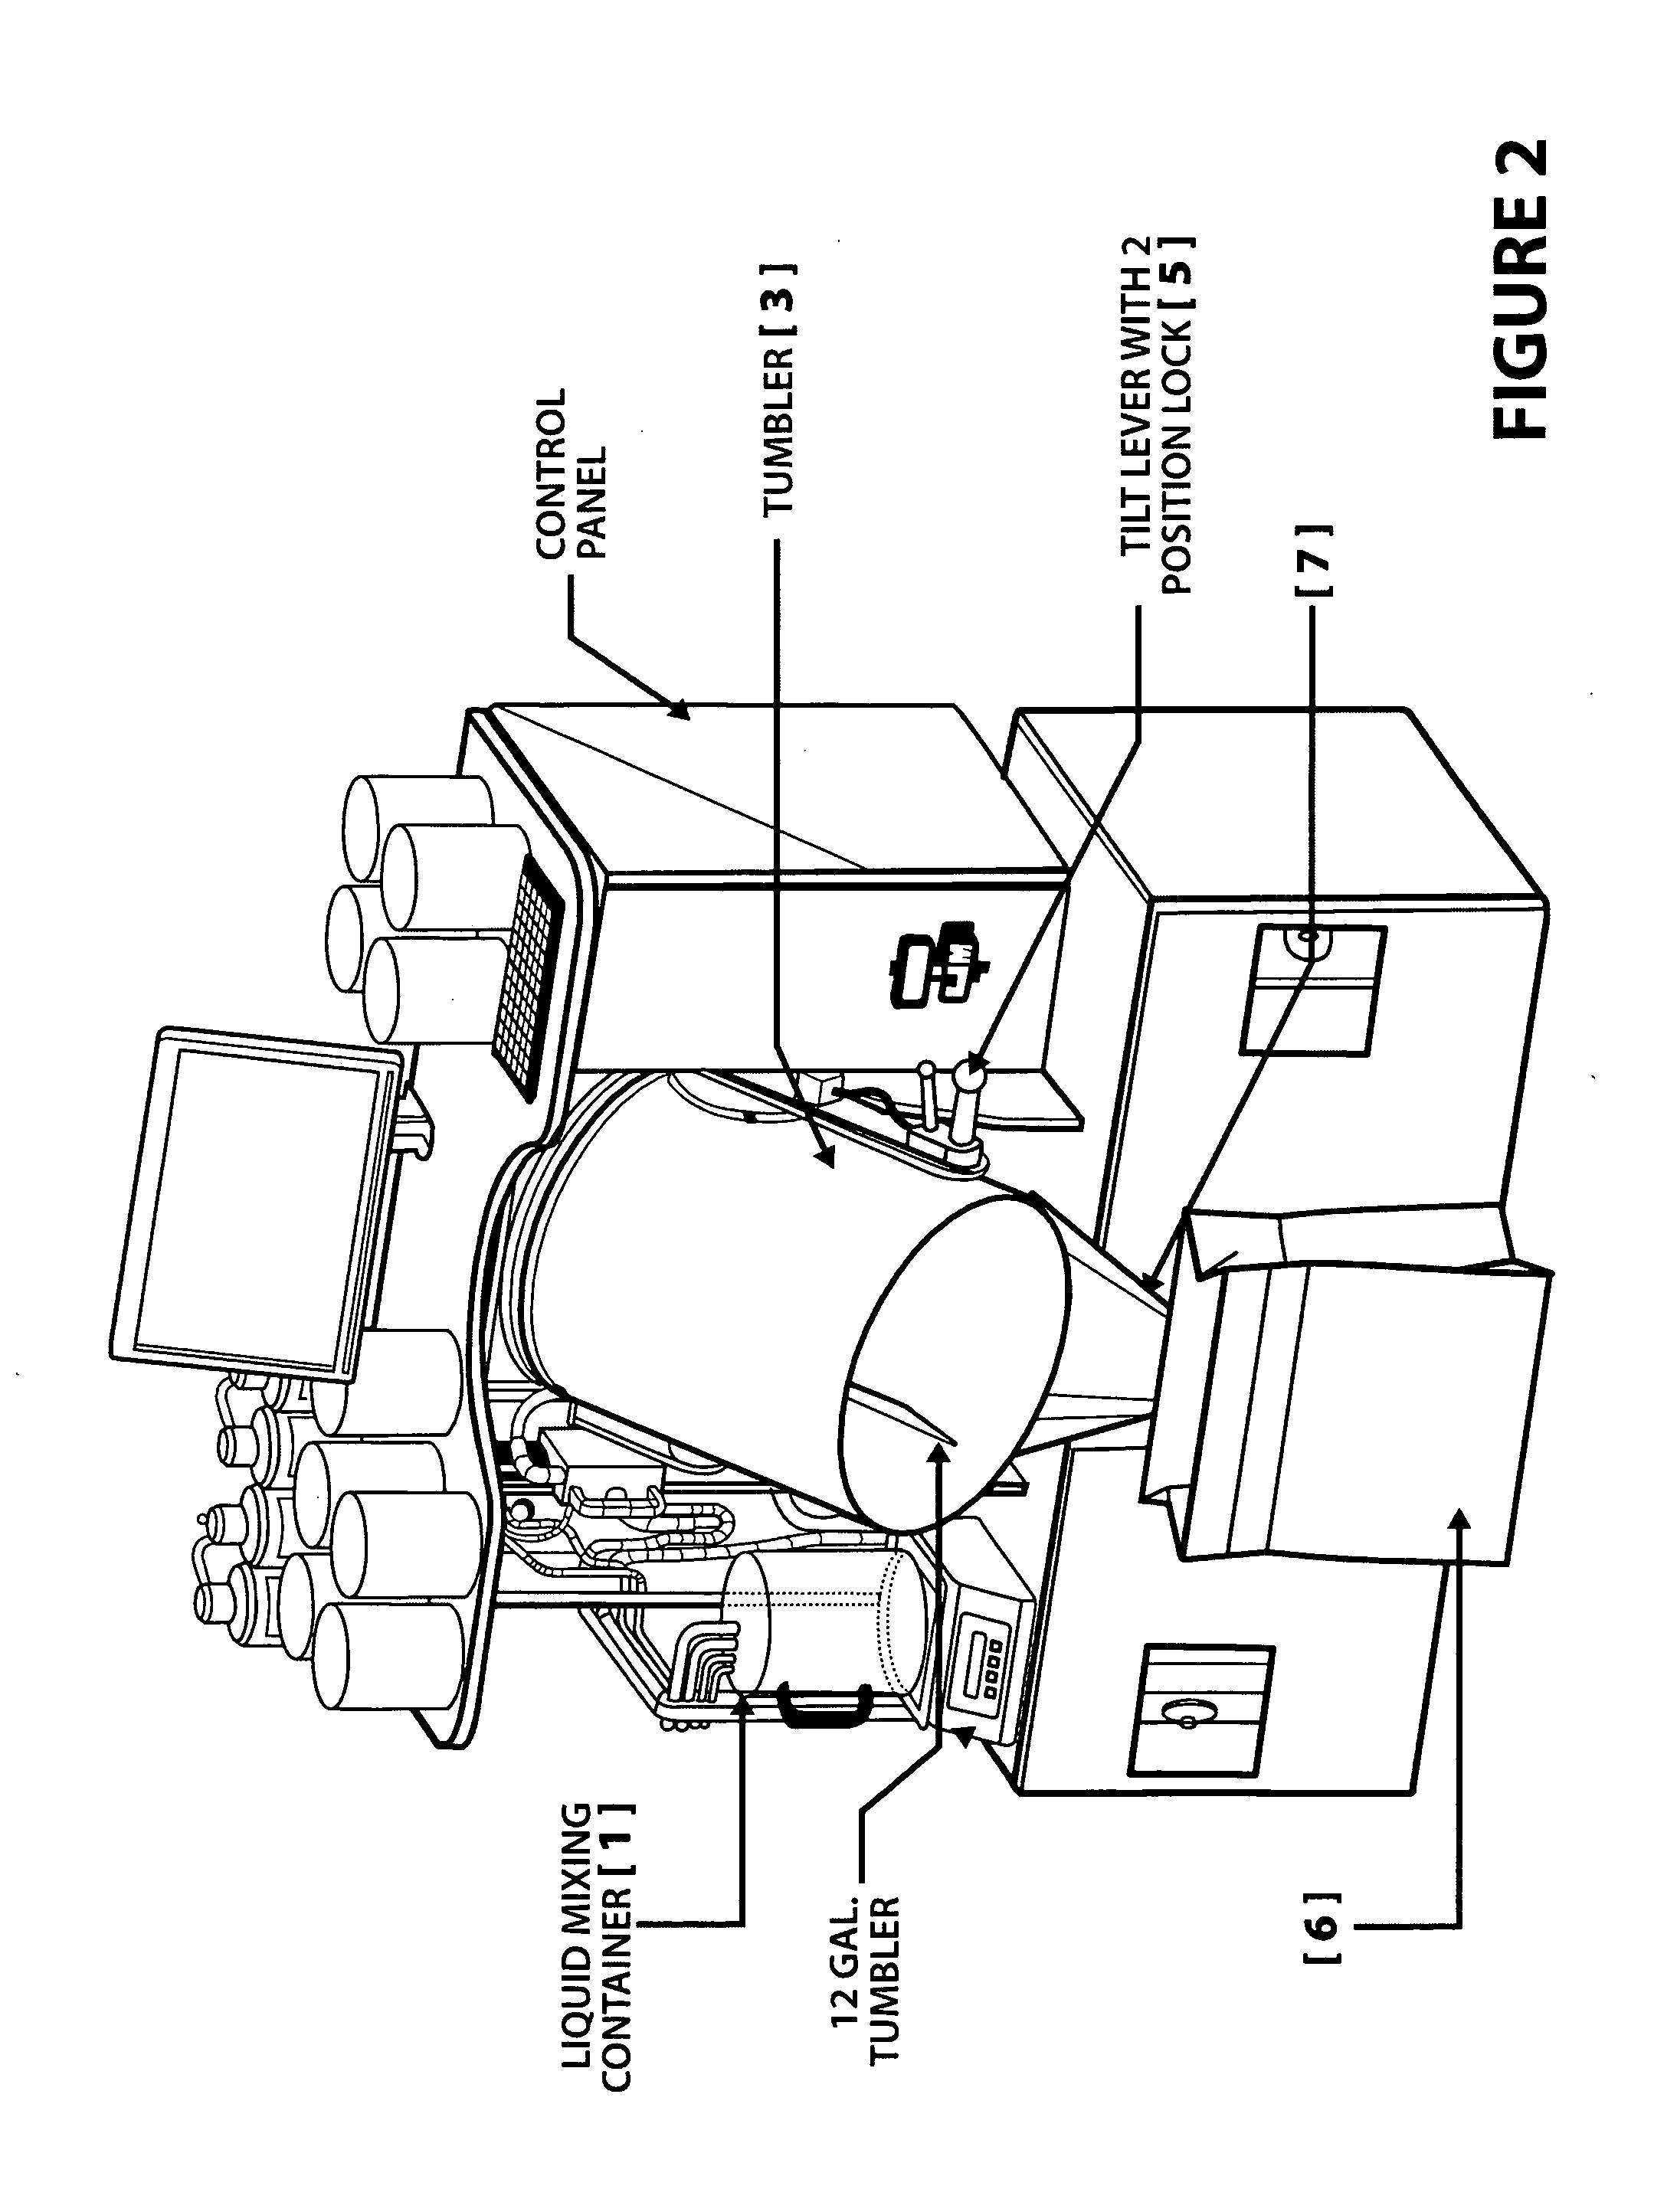 Device for adding enhancers to pet food and method of using same